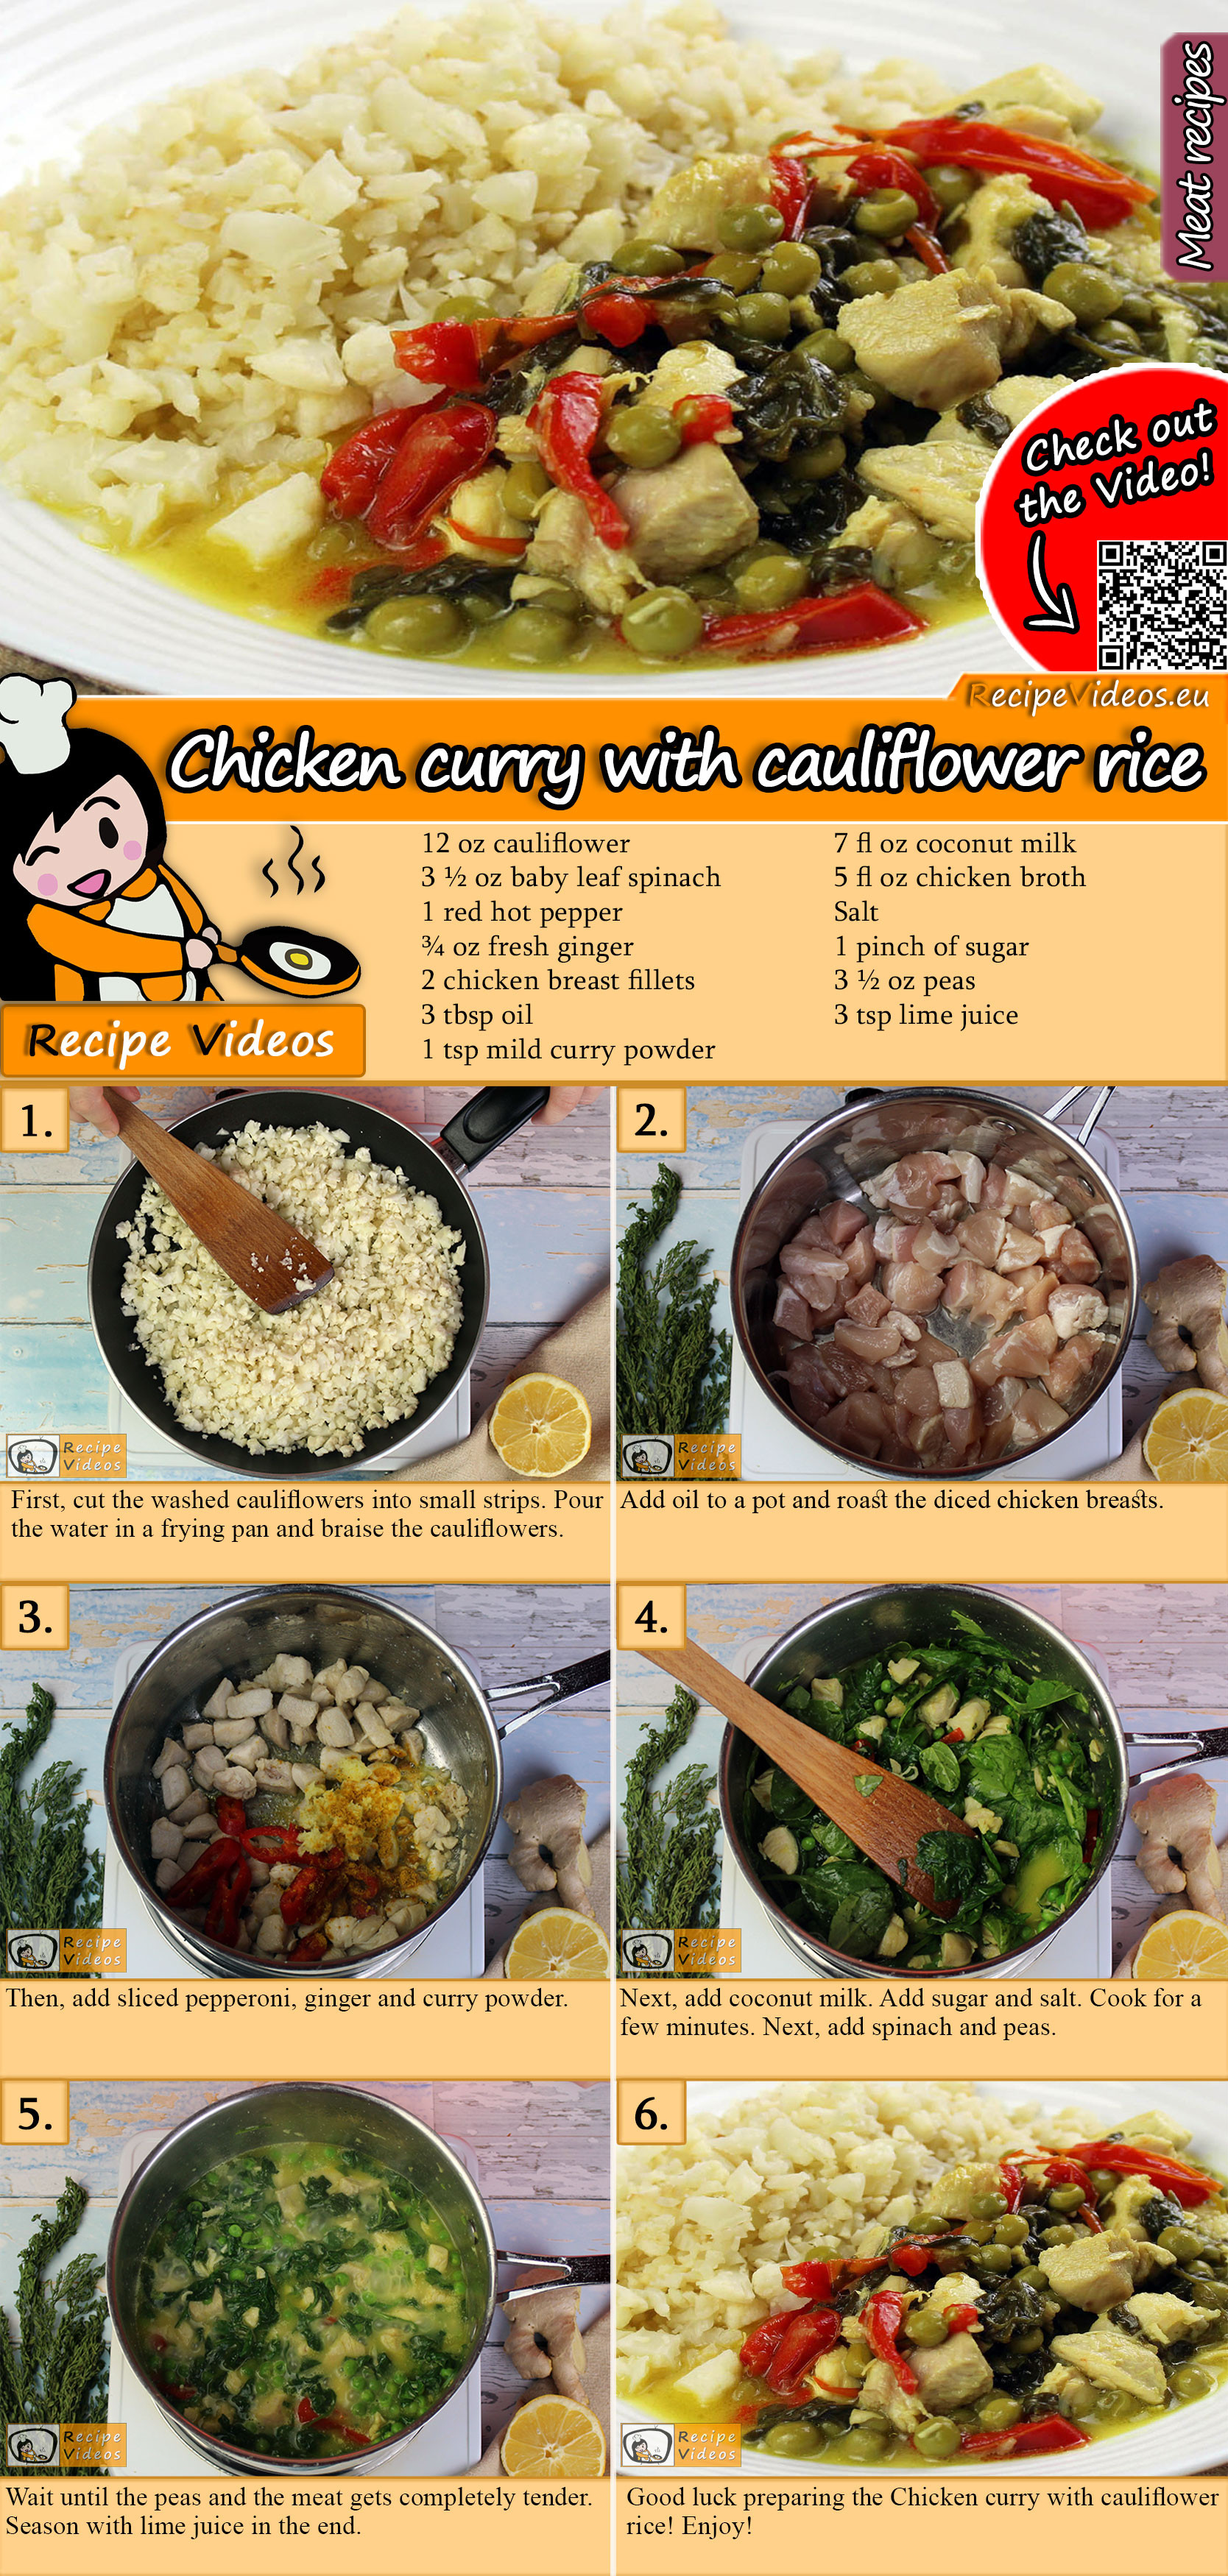 Chicken curry with cauliflower rice recipe with video